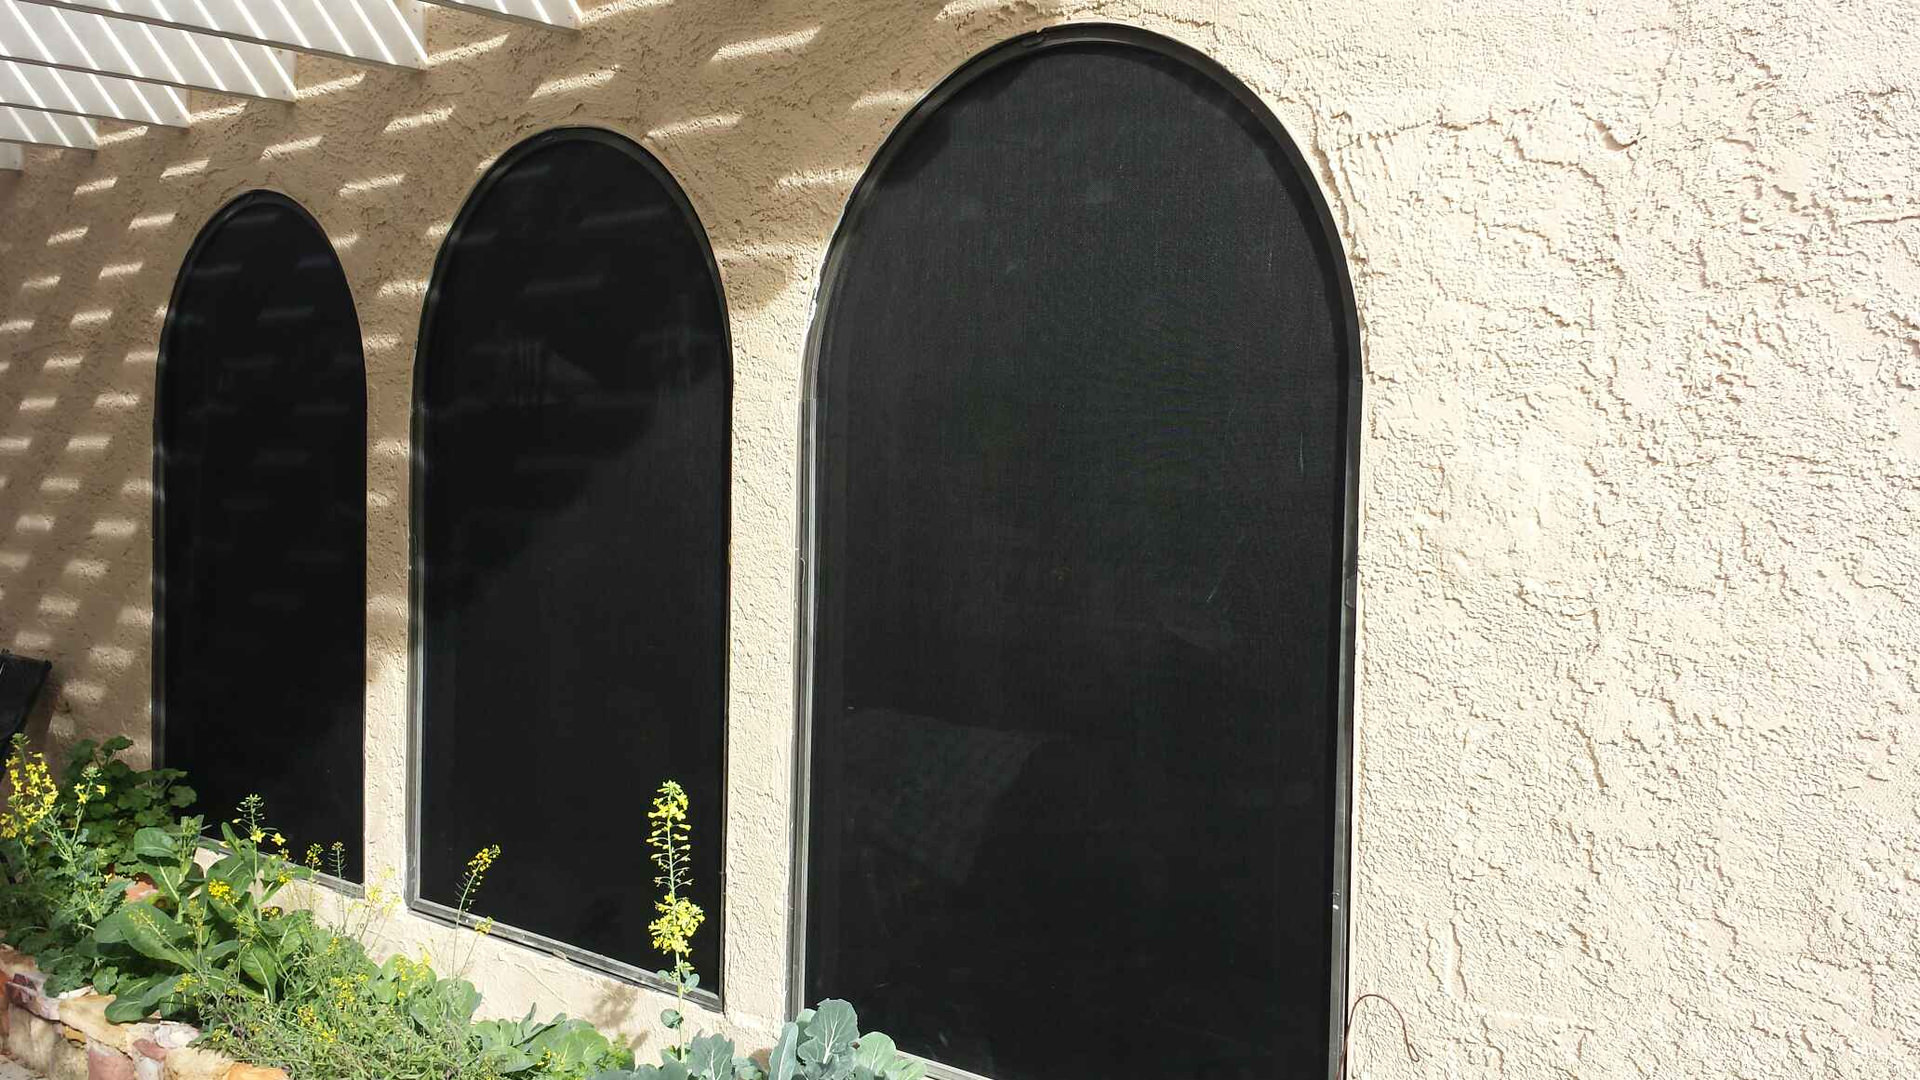 Eclipse Solar Screens Replacement sun screens that protect and save money